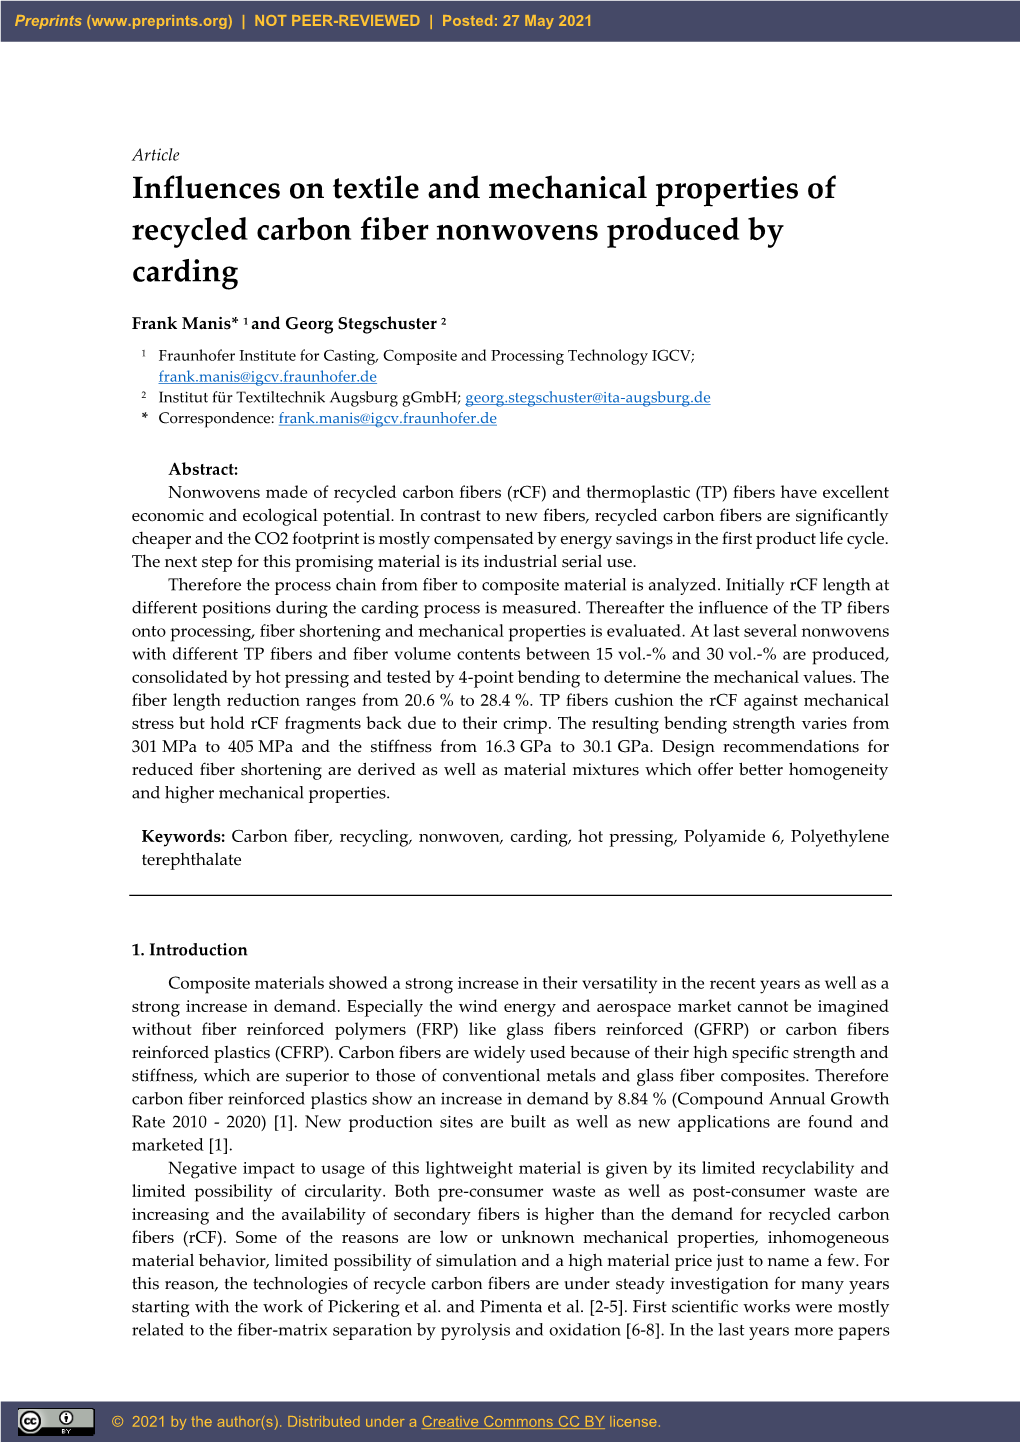 Influences on Textile and Mechanical Properties of Recycled Carbon Fiber Nonwovens Produced by Carding